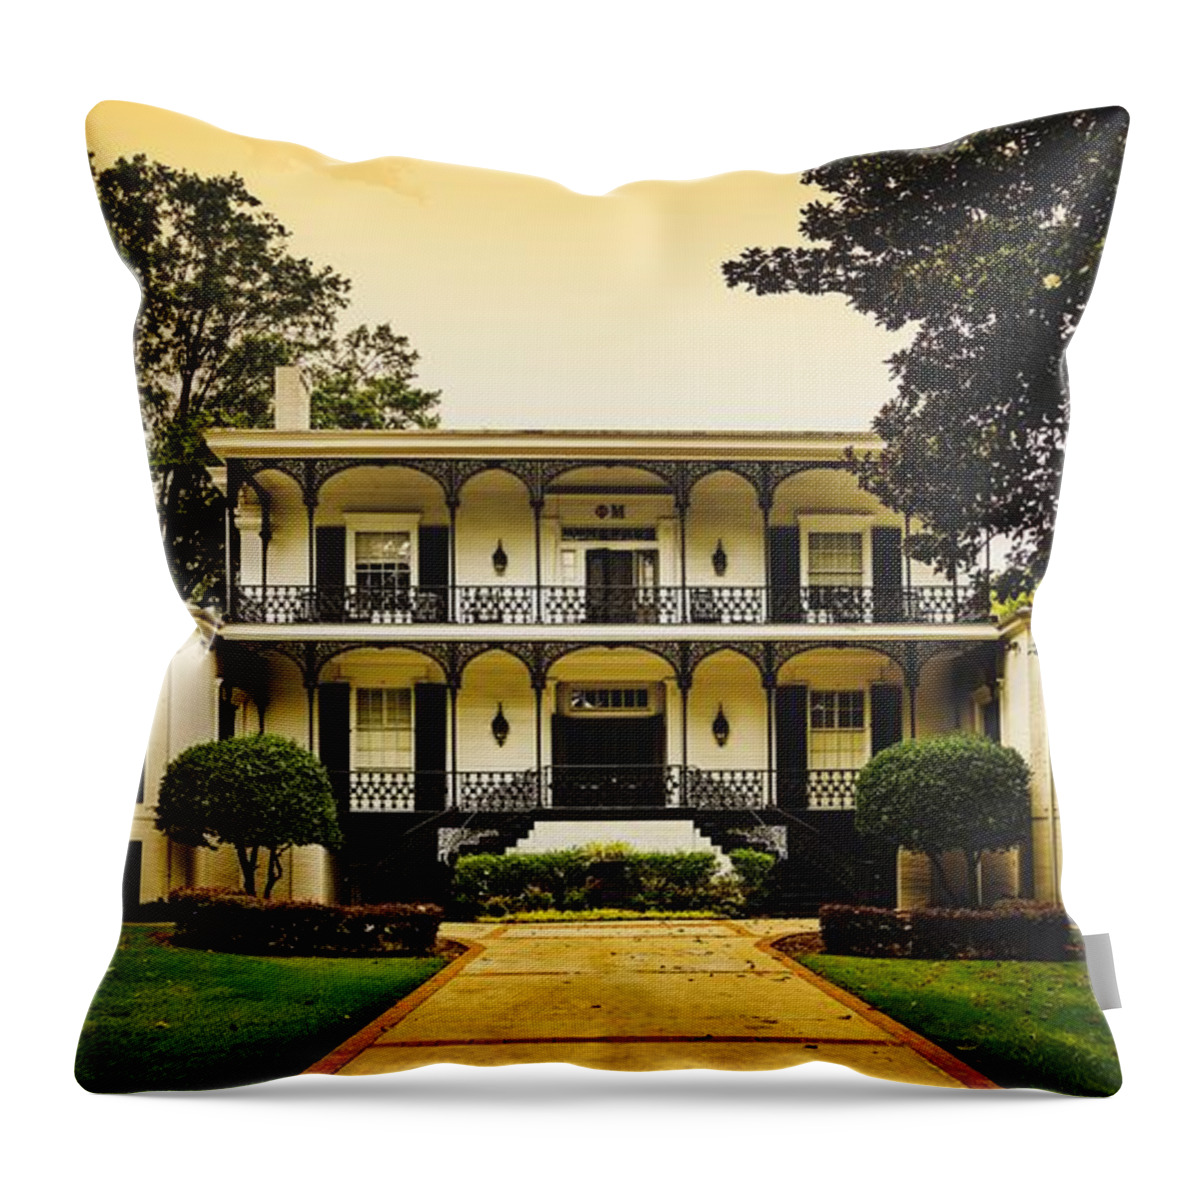 Landscape Throw Pillow featuring the photograph Phi Mu Sorority House - University Of Georgia by Mountain Dreams